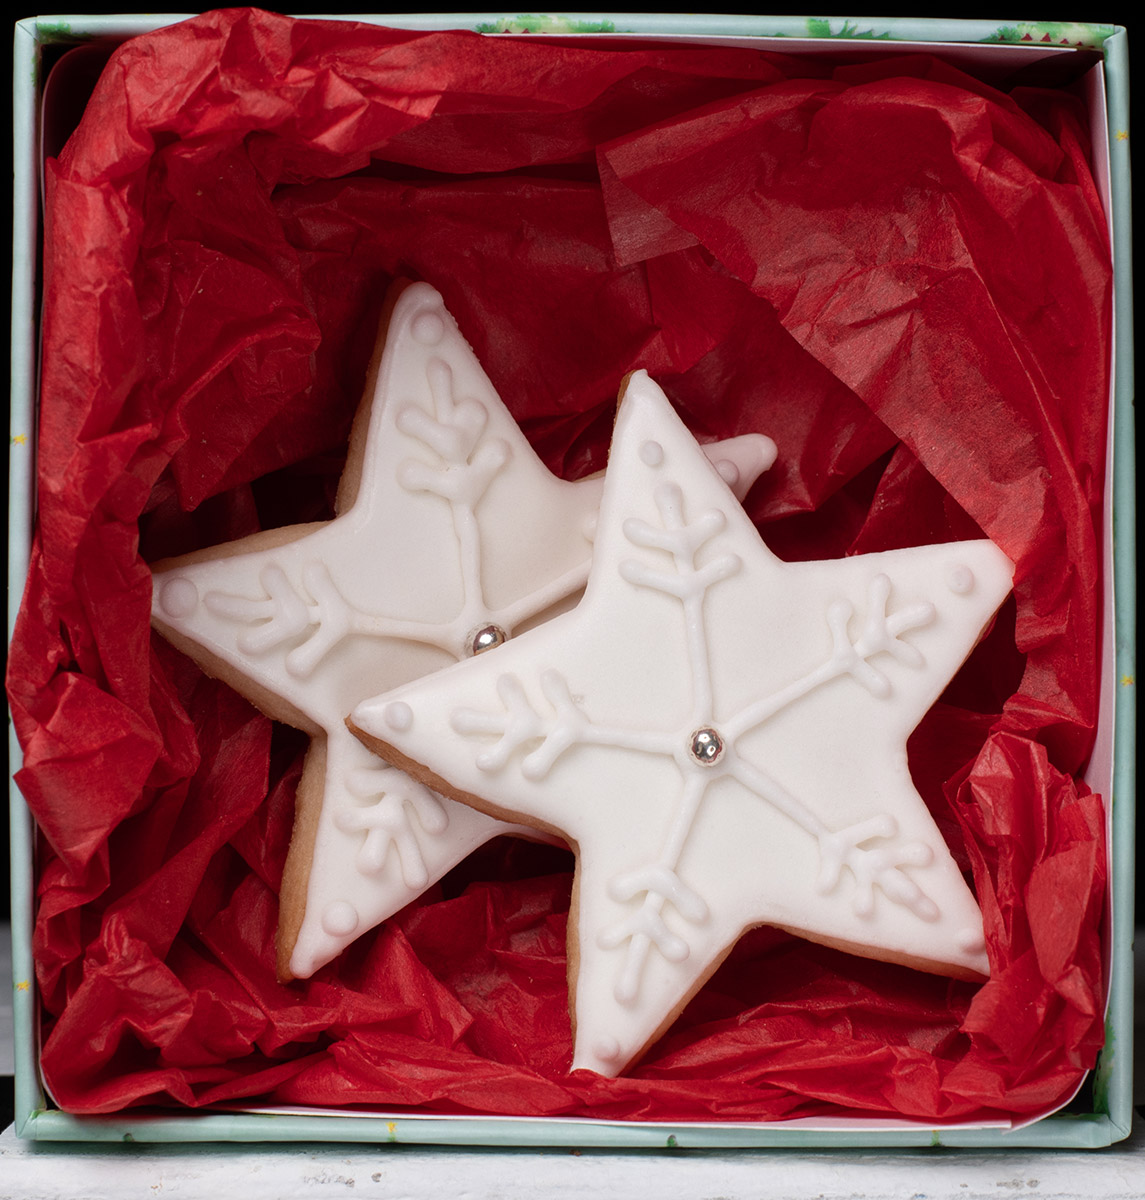 Star-shaped sugar cookies in a box with red tissue paper